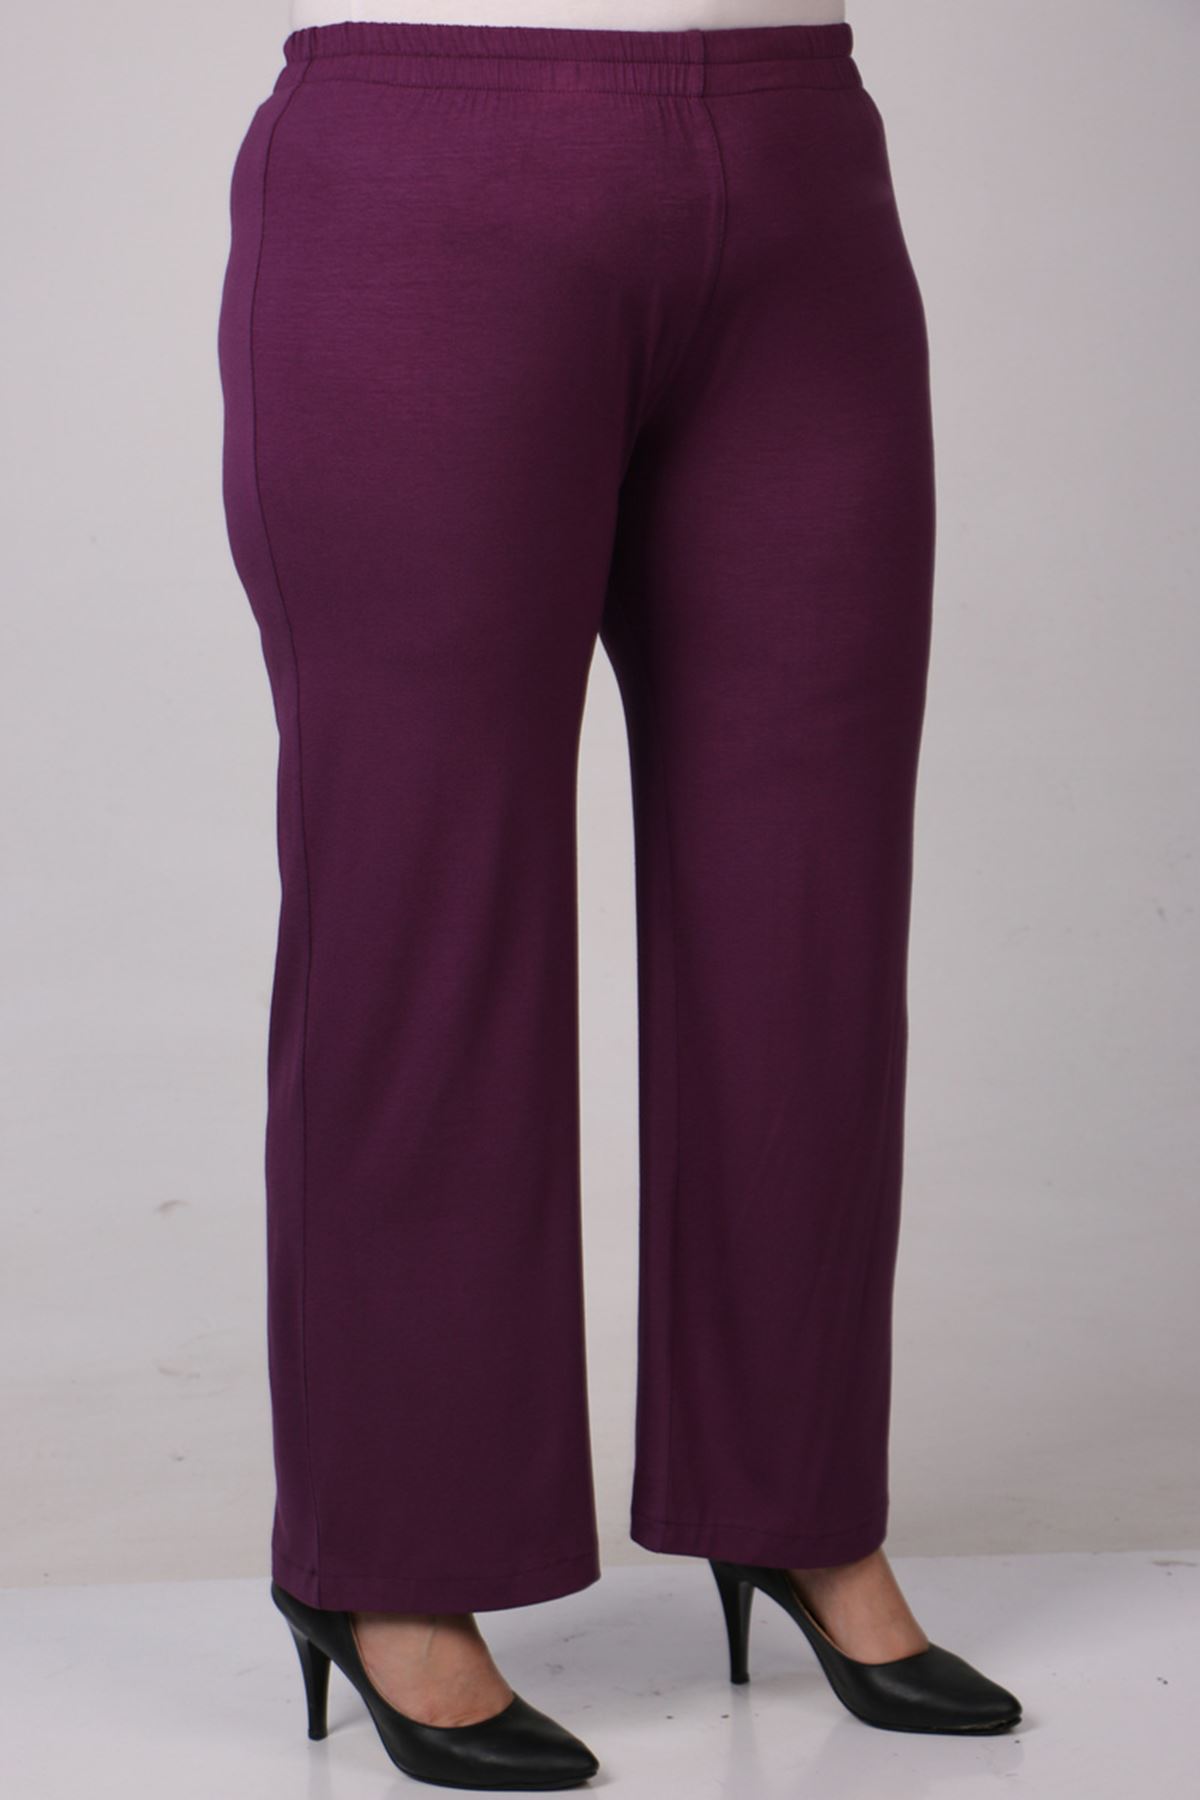 37003 Large Size Sequined Combed Cotton Pants Suit-Lilac